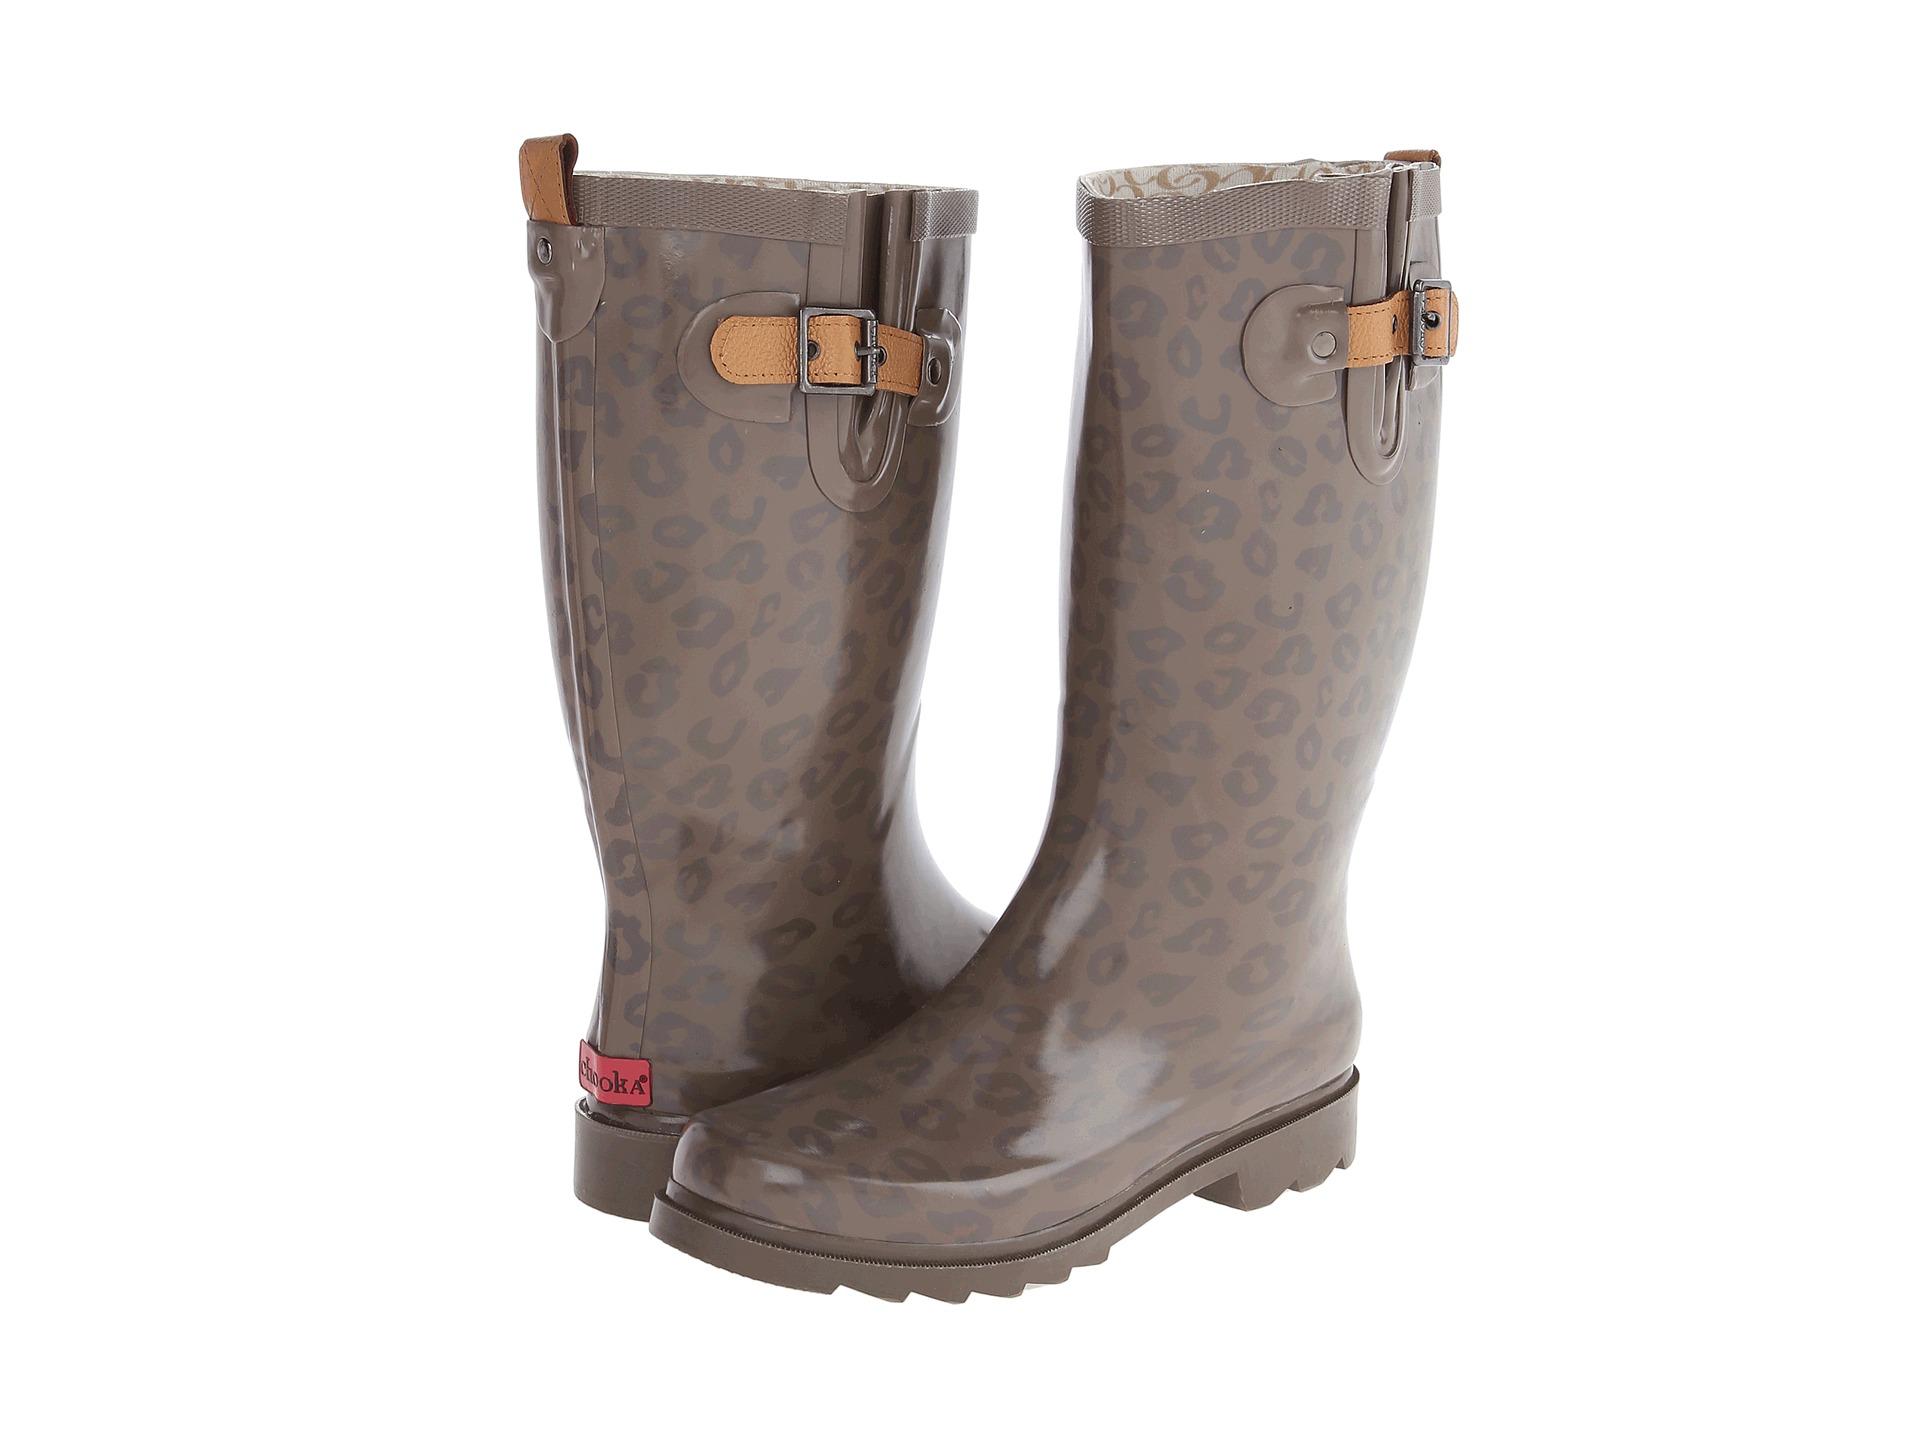 Chooka Top Solid Leopard Rain Boot | Shipped Free at Zappos